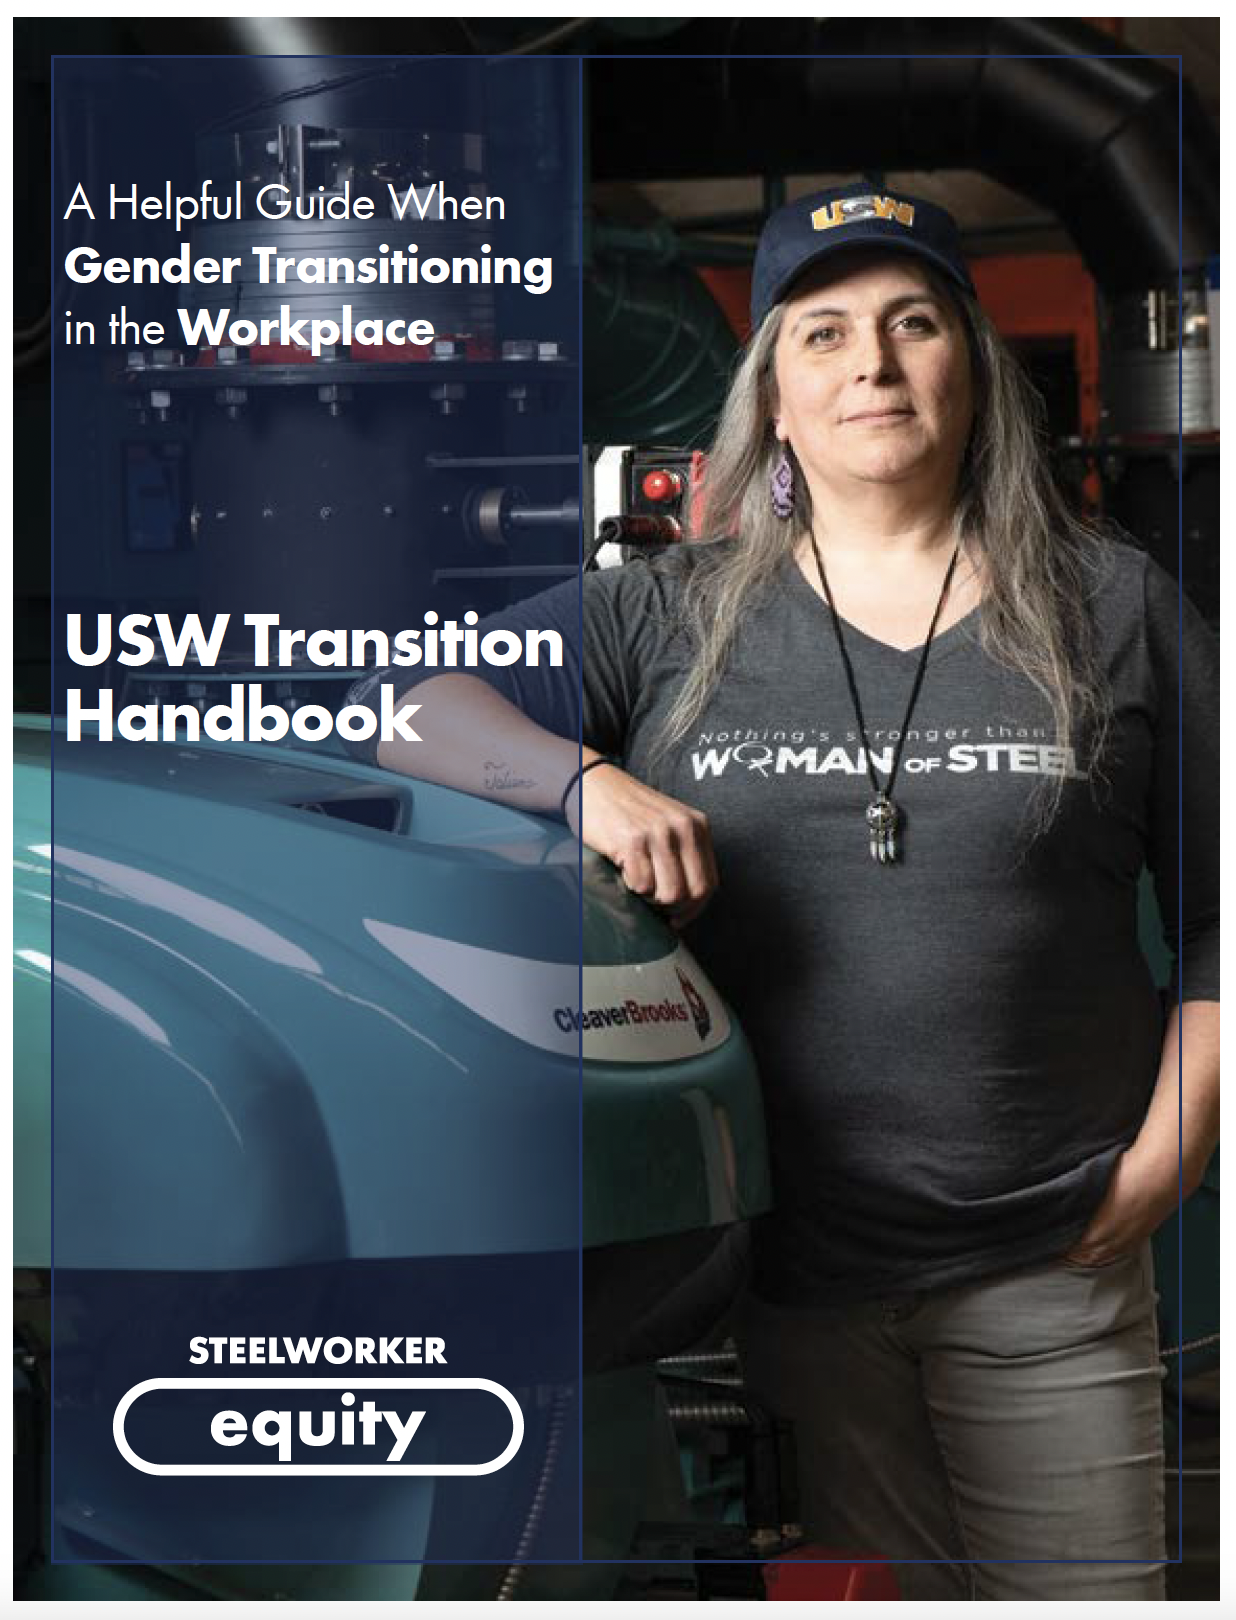 Image: Cover of the USW Transition handbook. A woman wearing a ball cap and a v-neck Women of Steel shirt stands confidently in an industrial setting, beside some equipment.